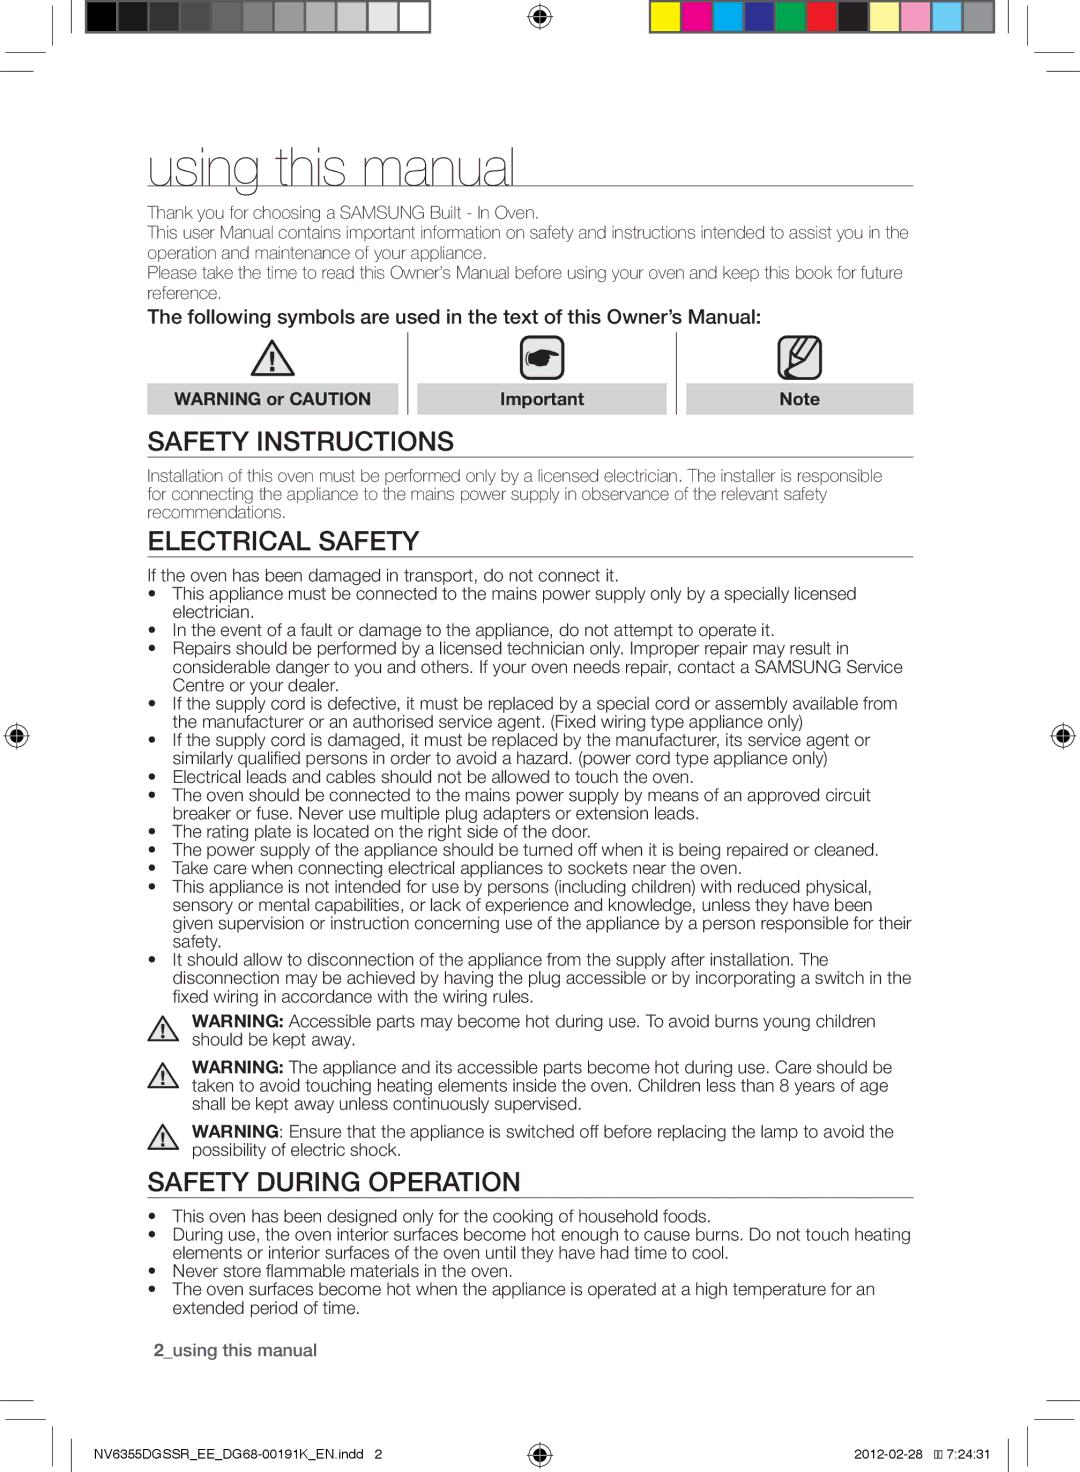 Samsung NV6355EGSBD/EE, NV6355DGSSR/EE Using this manual, Safety instructions, Electrical safety, Safety during operation 